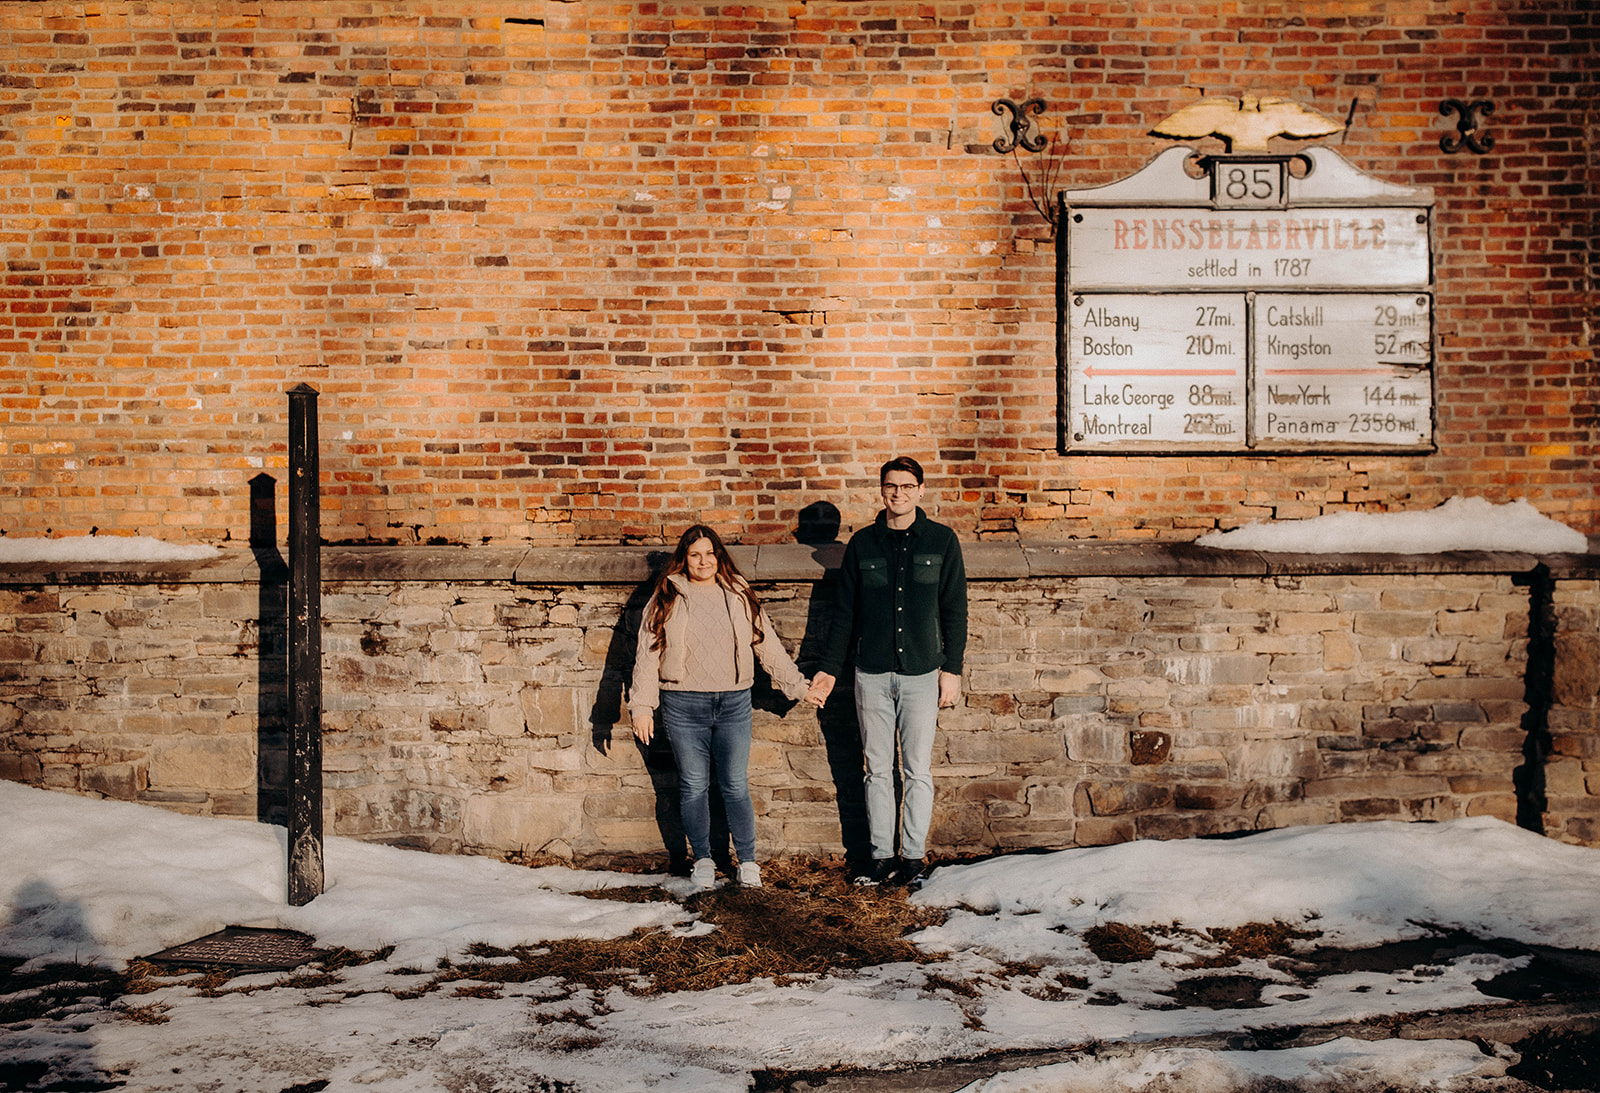 Couple pose together outside a historic Rensselaerville New York building during their dreamy winter engagement photoshoot